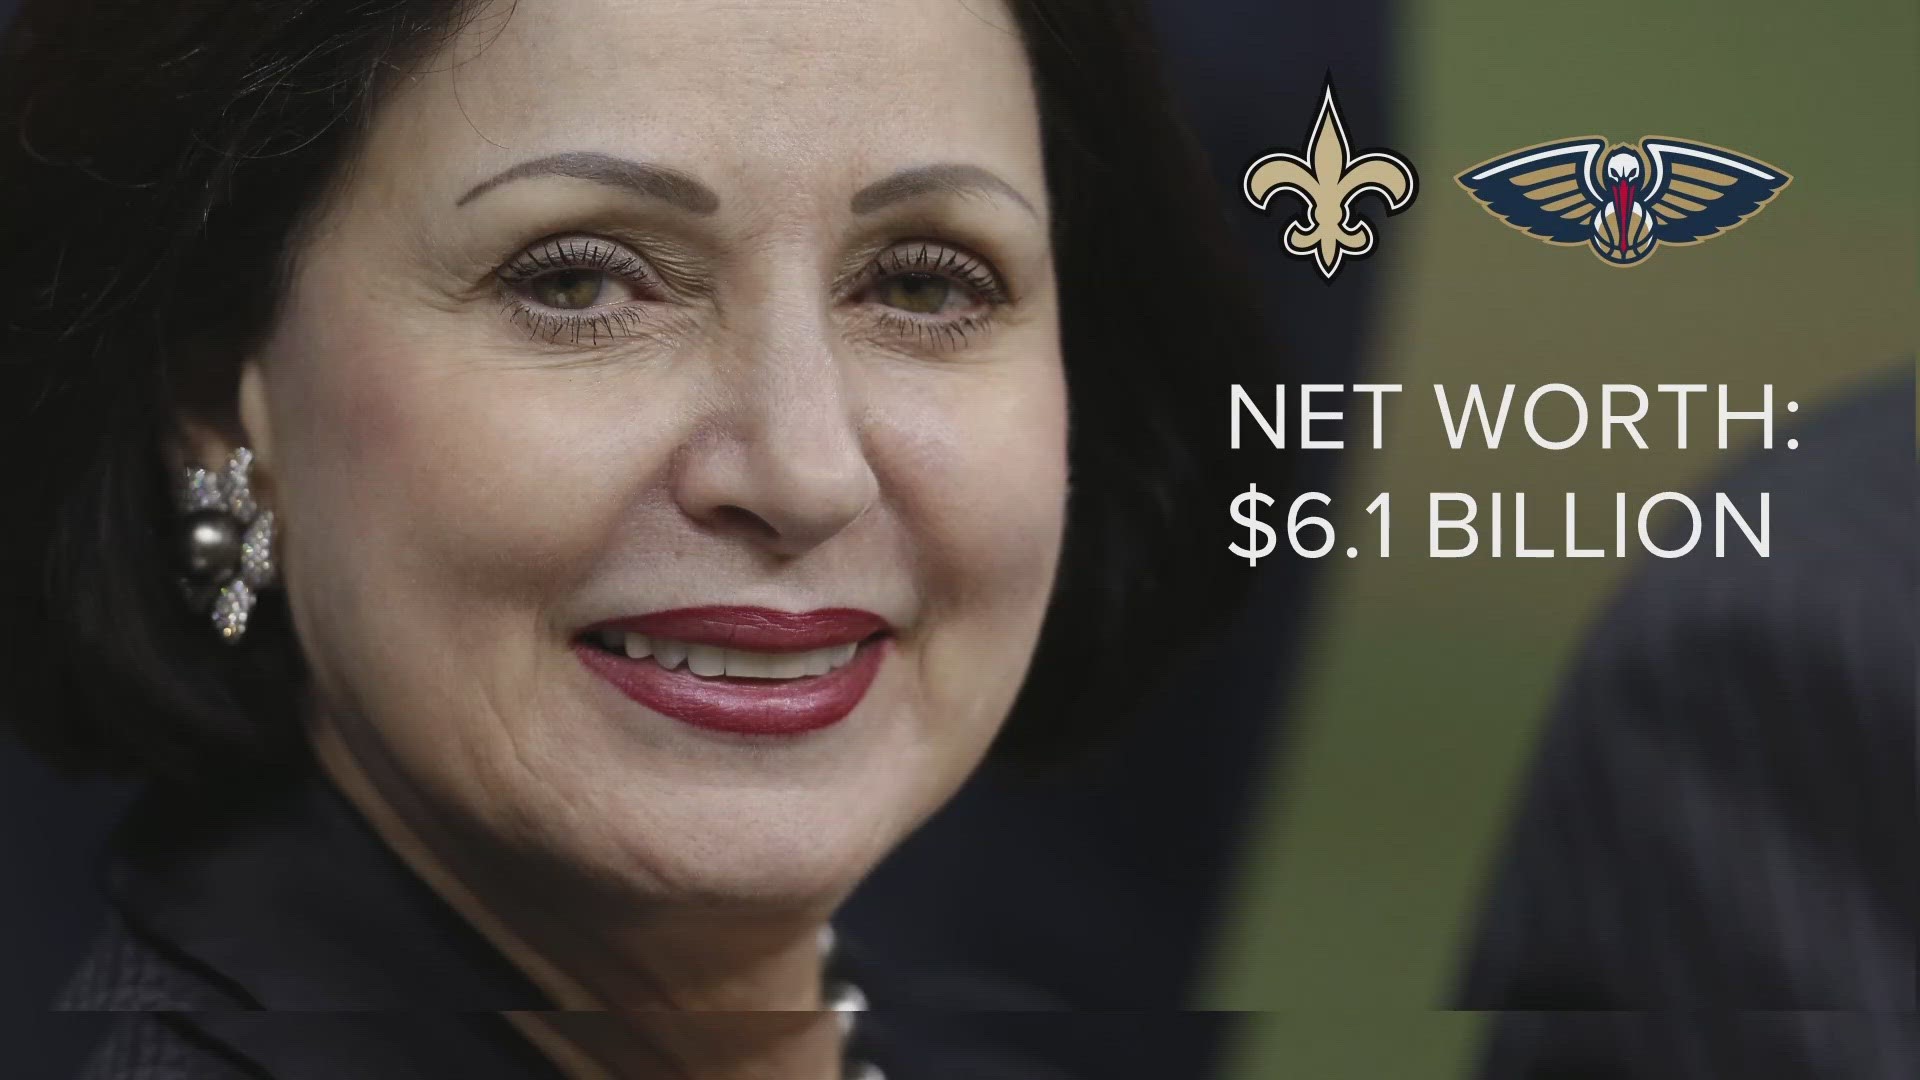 Two well-known Louisiana business owners and philanthropists are among the richest people in the world.